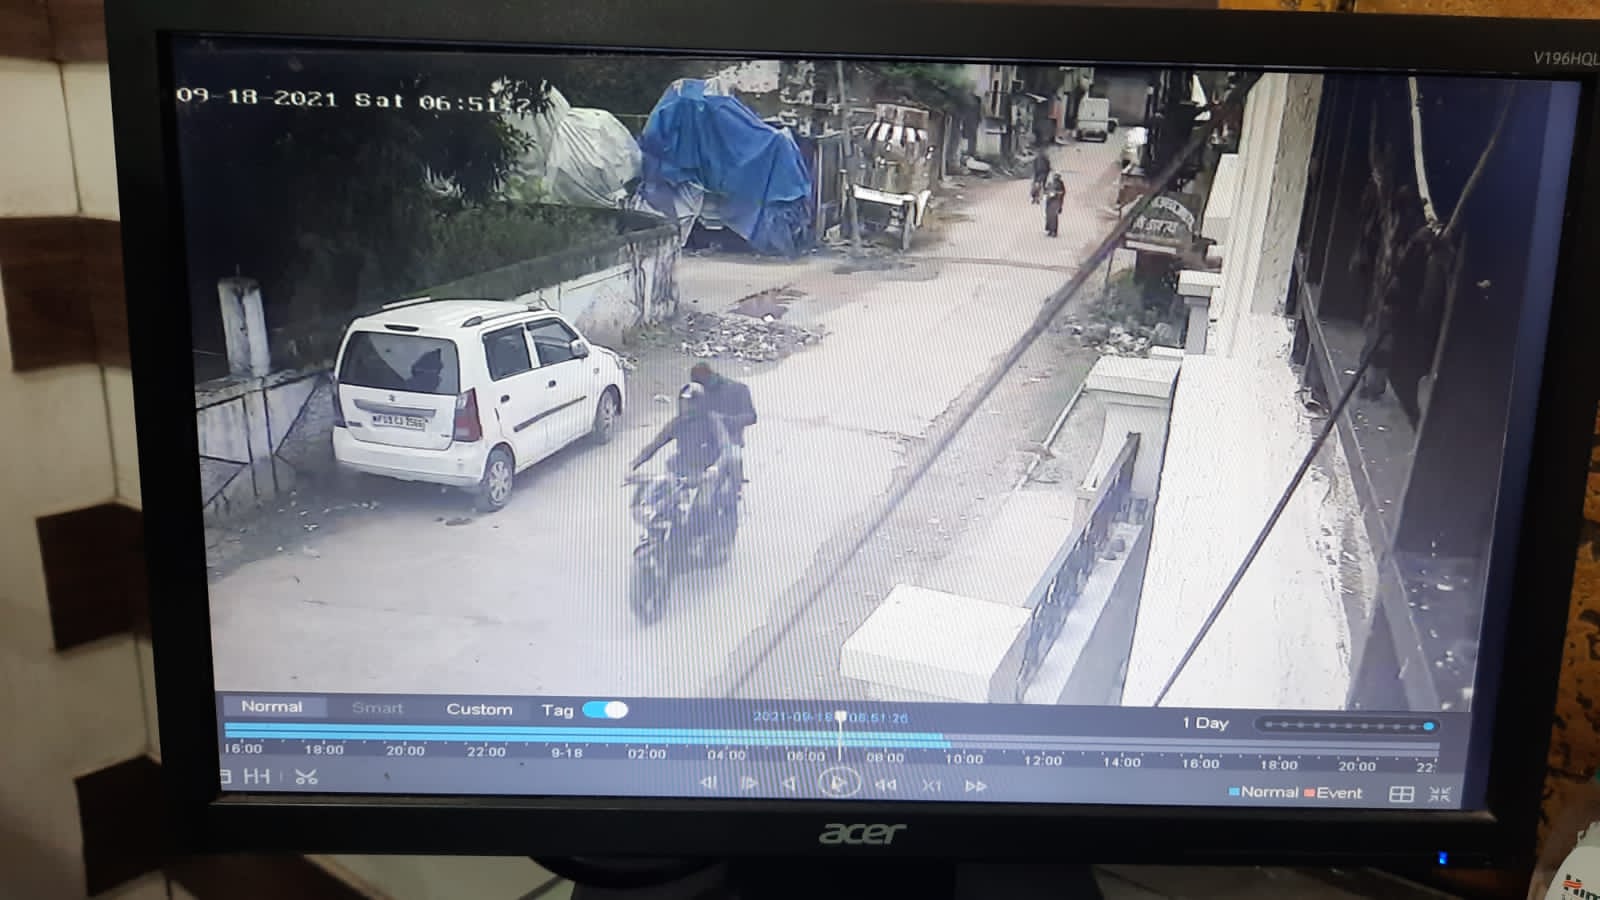 Bike-riding miscreants did chain snatching from the neck of the woman